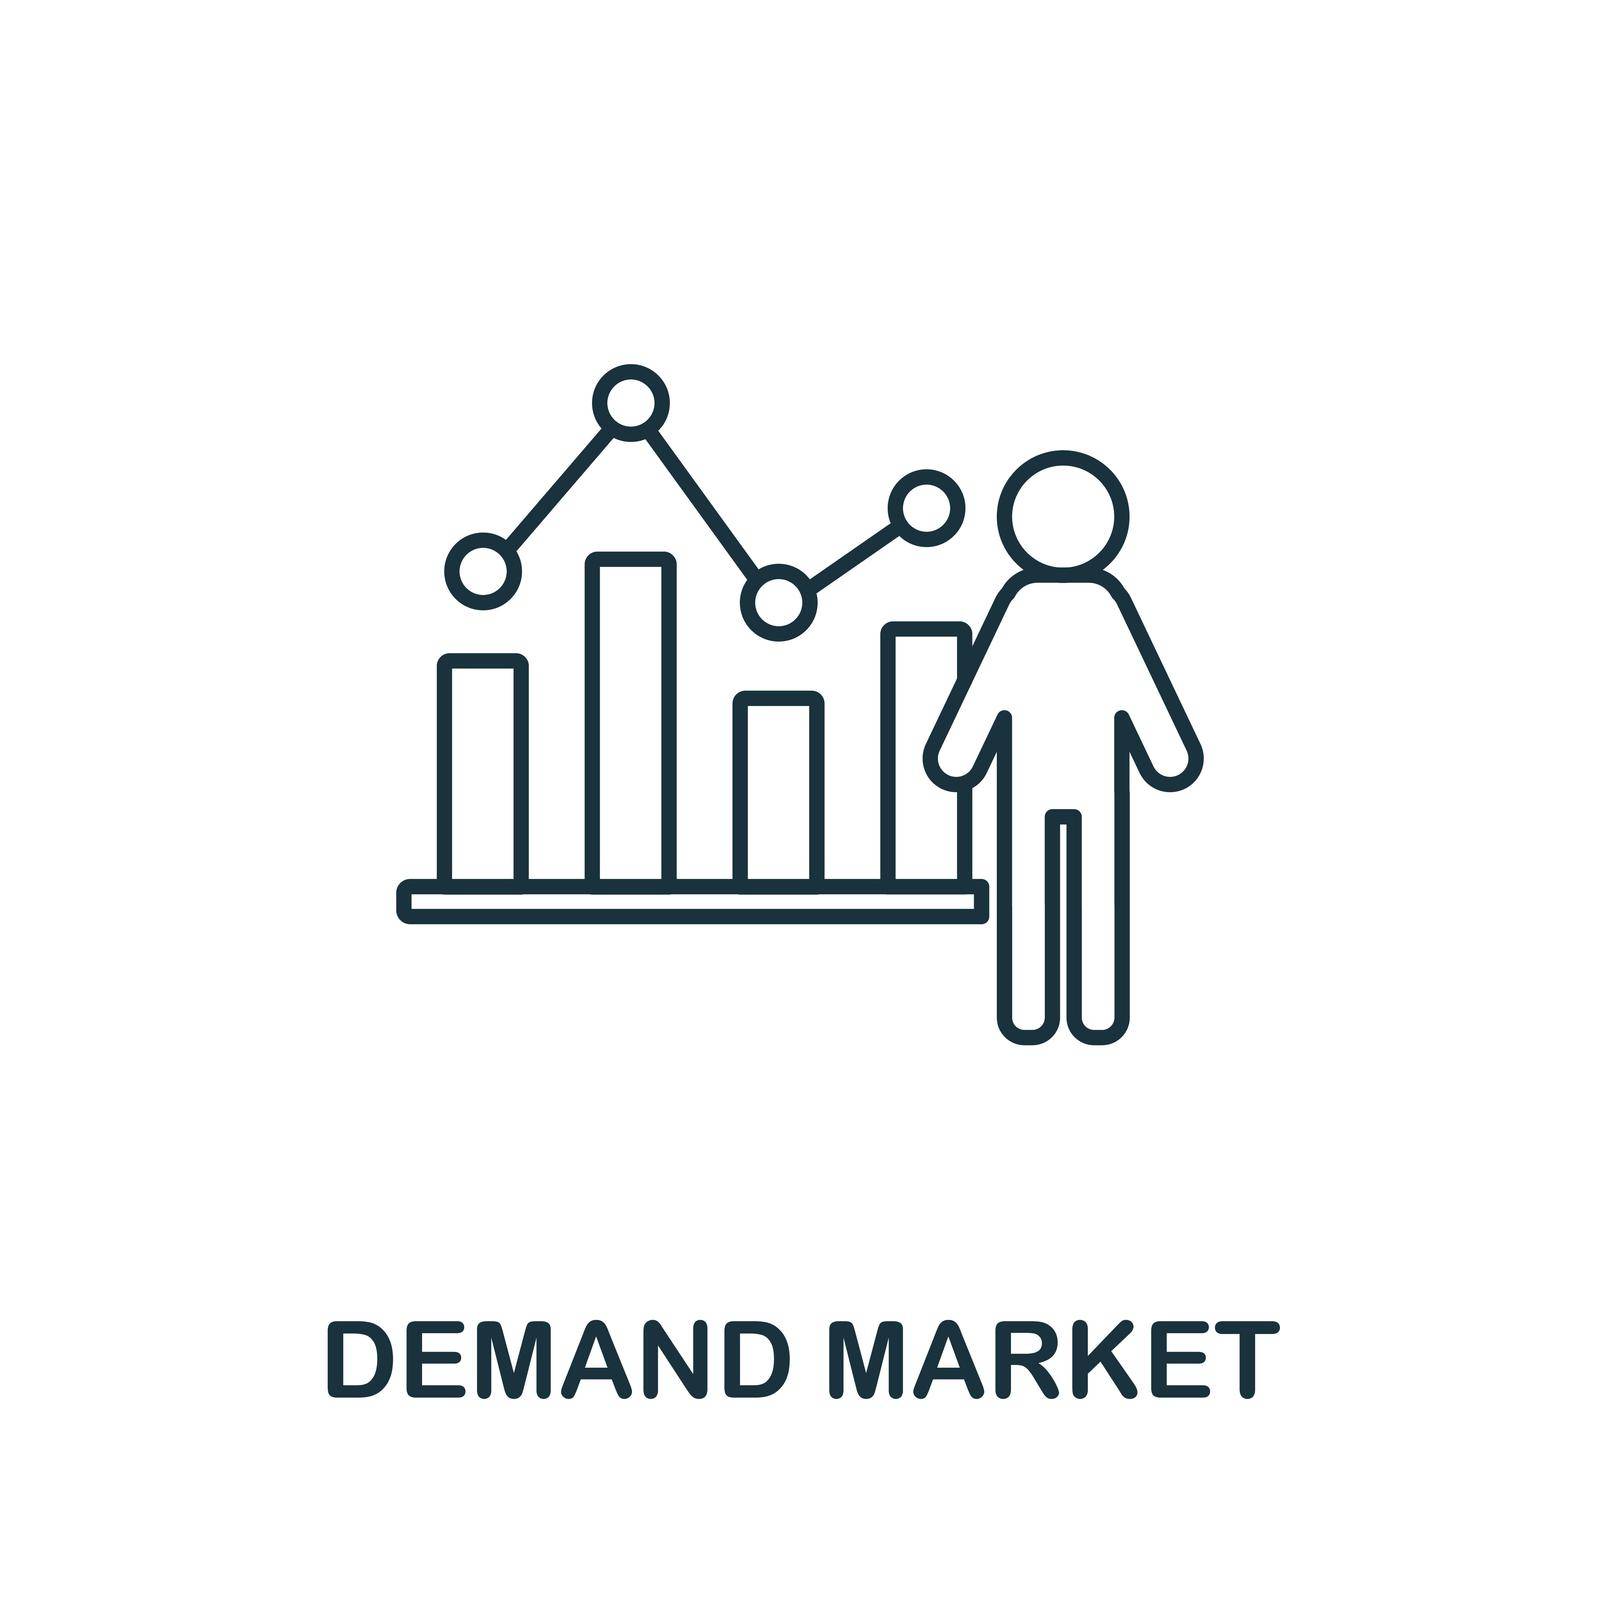 Demand Market icon. Outline sign from market economy collection. Line Demand Market icon for infographics, wed design and more.